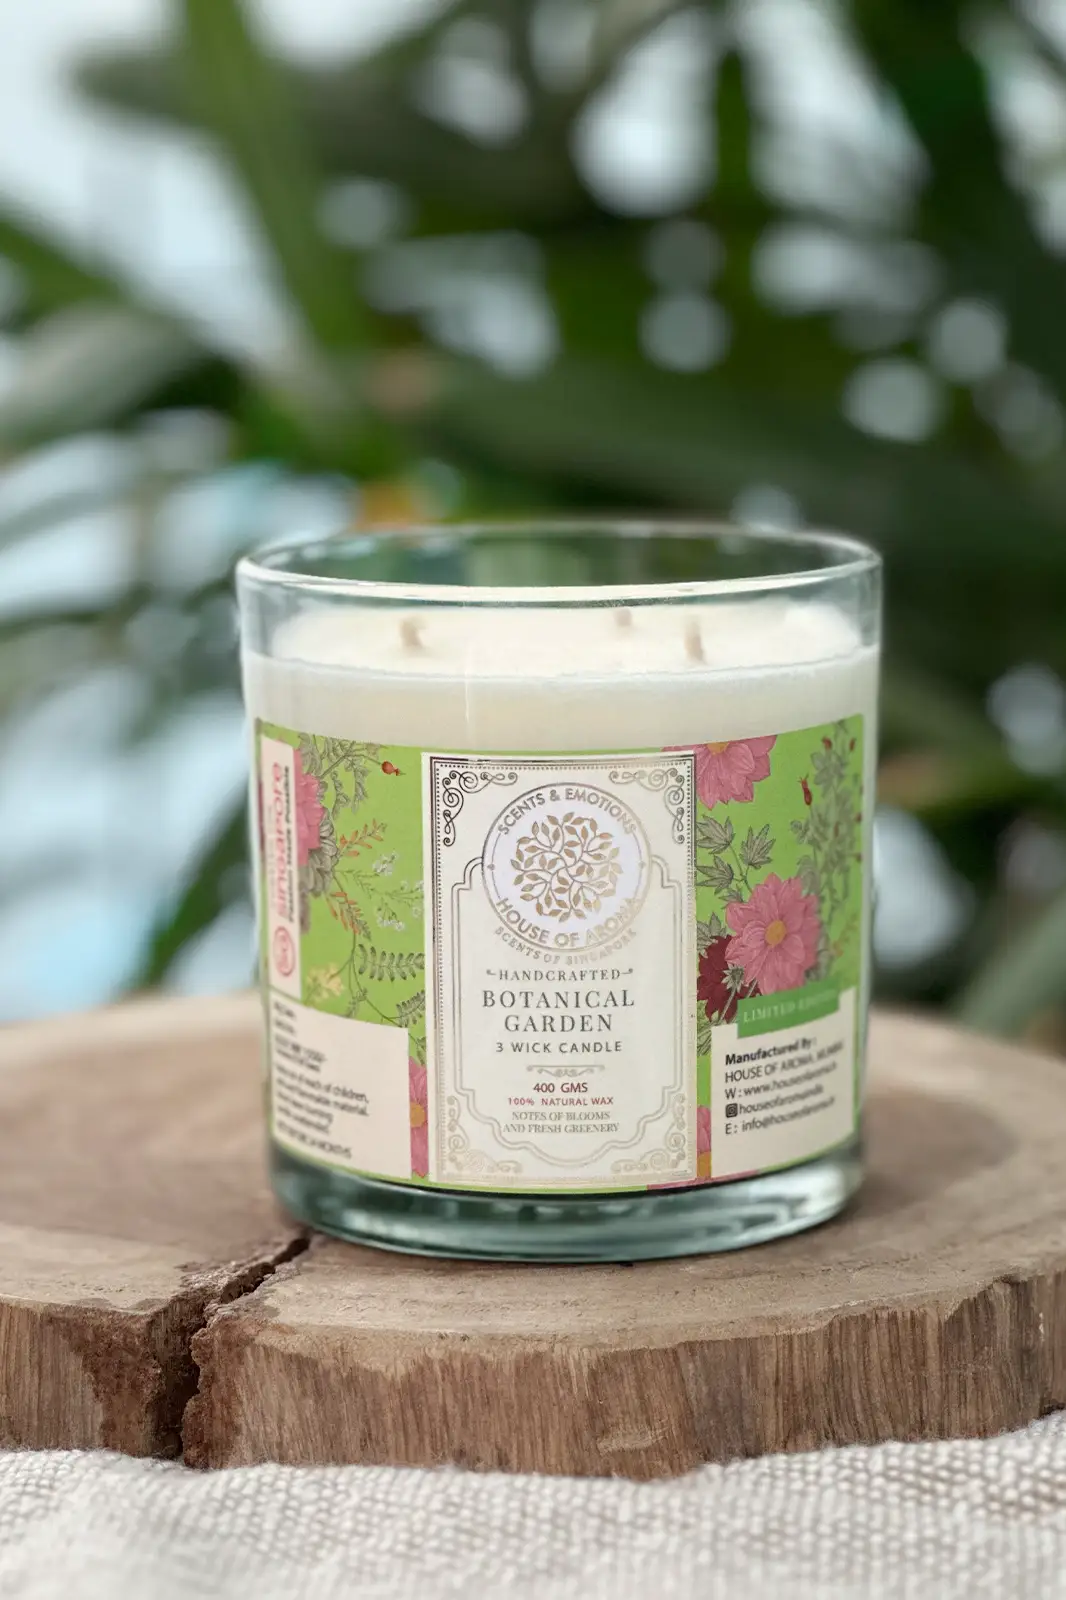 Natural wax botanical garden 3 wick candle, 3 wick candle, 3 wick candle, wax candle, soy wax candle, online scented candles, 3 wick soy wax candles, wax candles, house of aroma